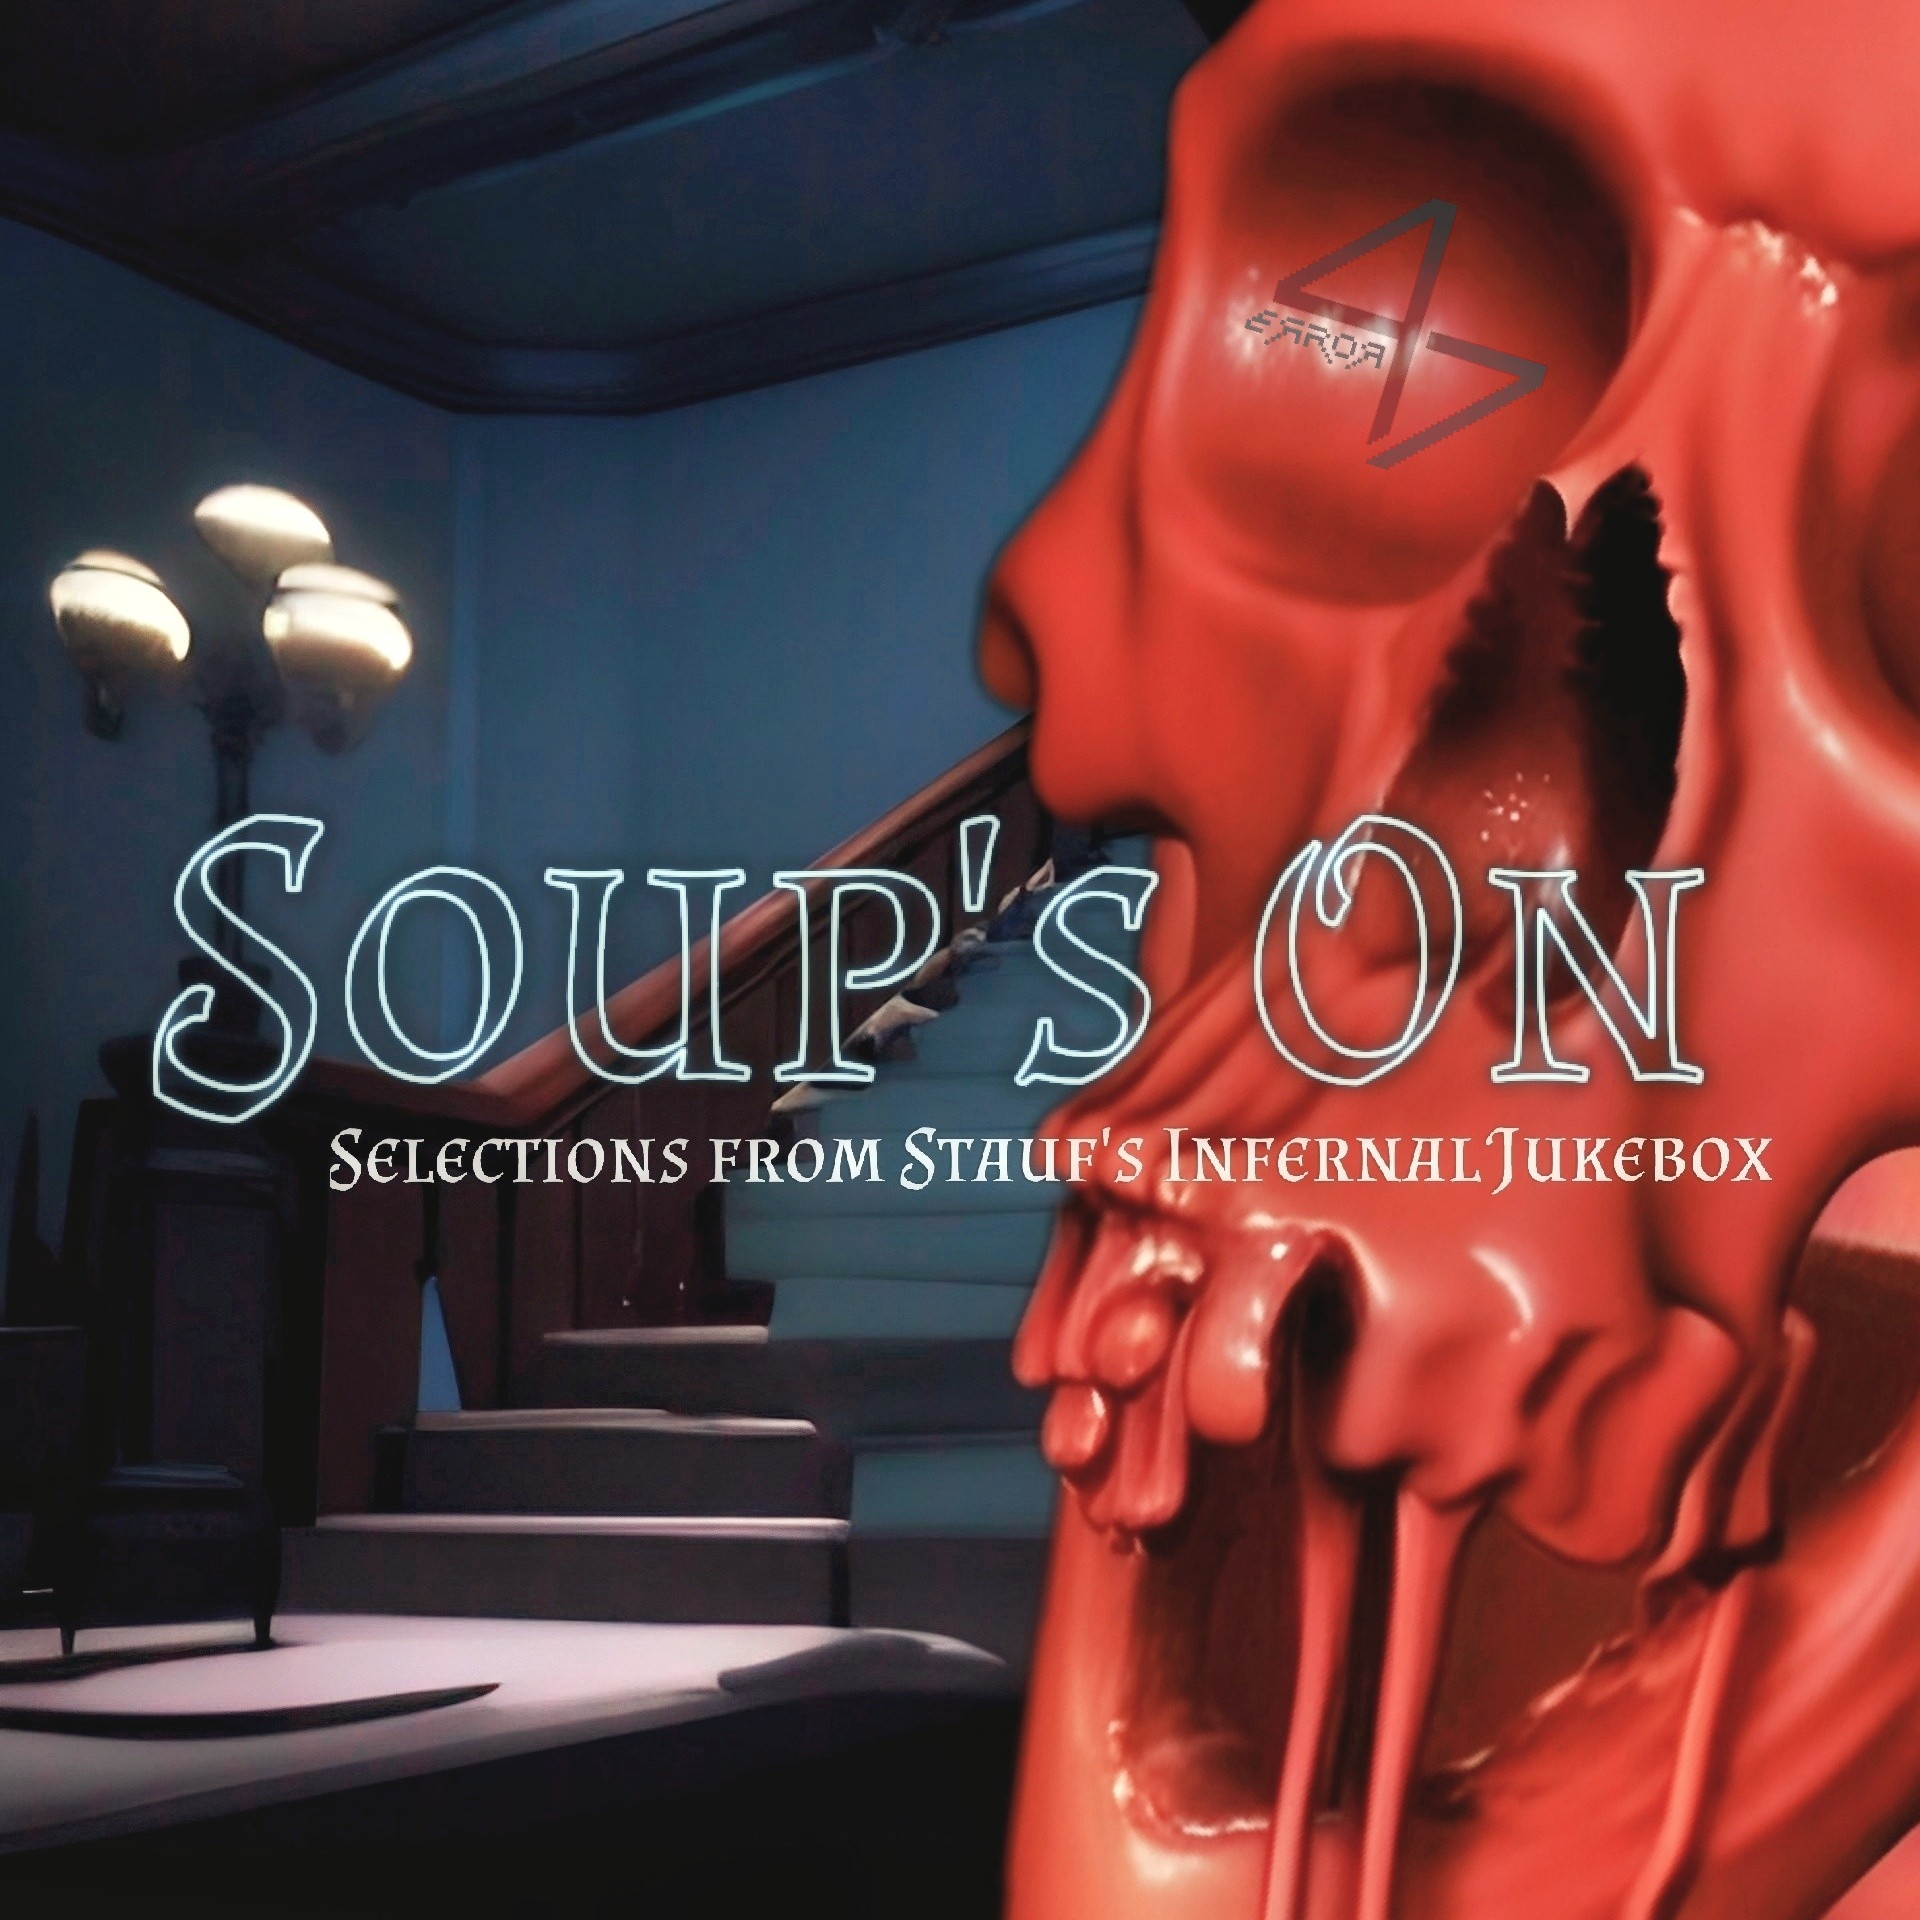 Soup's On - Selections from Stauf's Infernal Jukebox